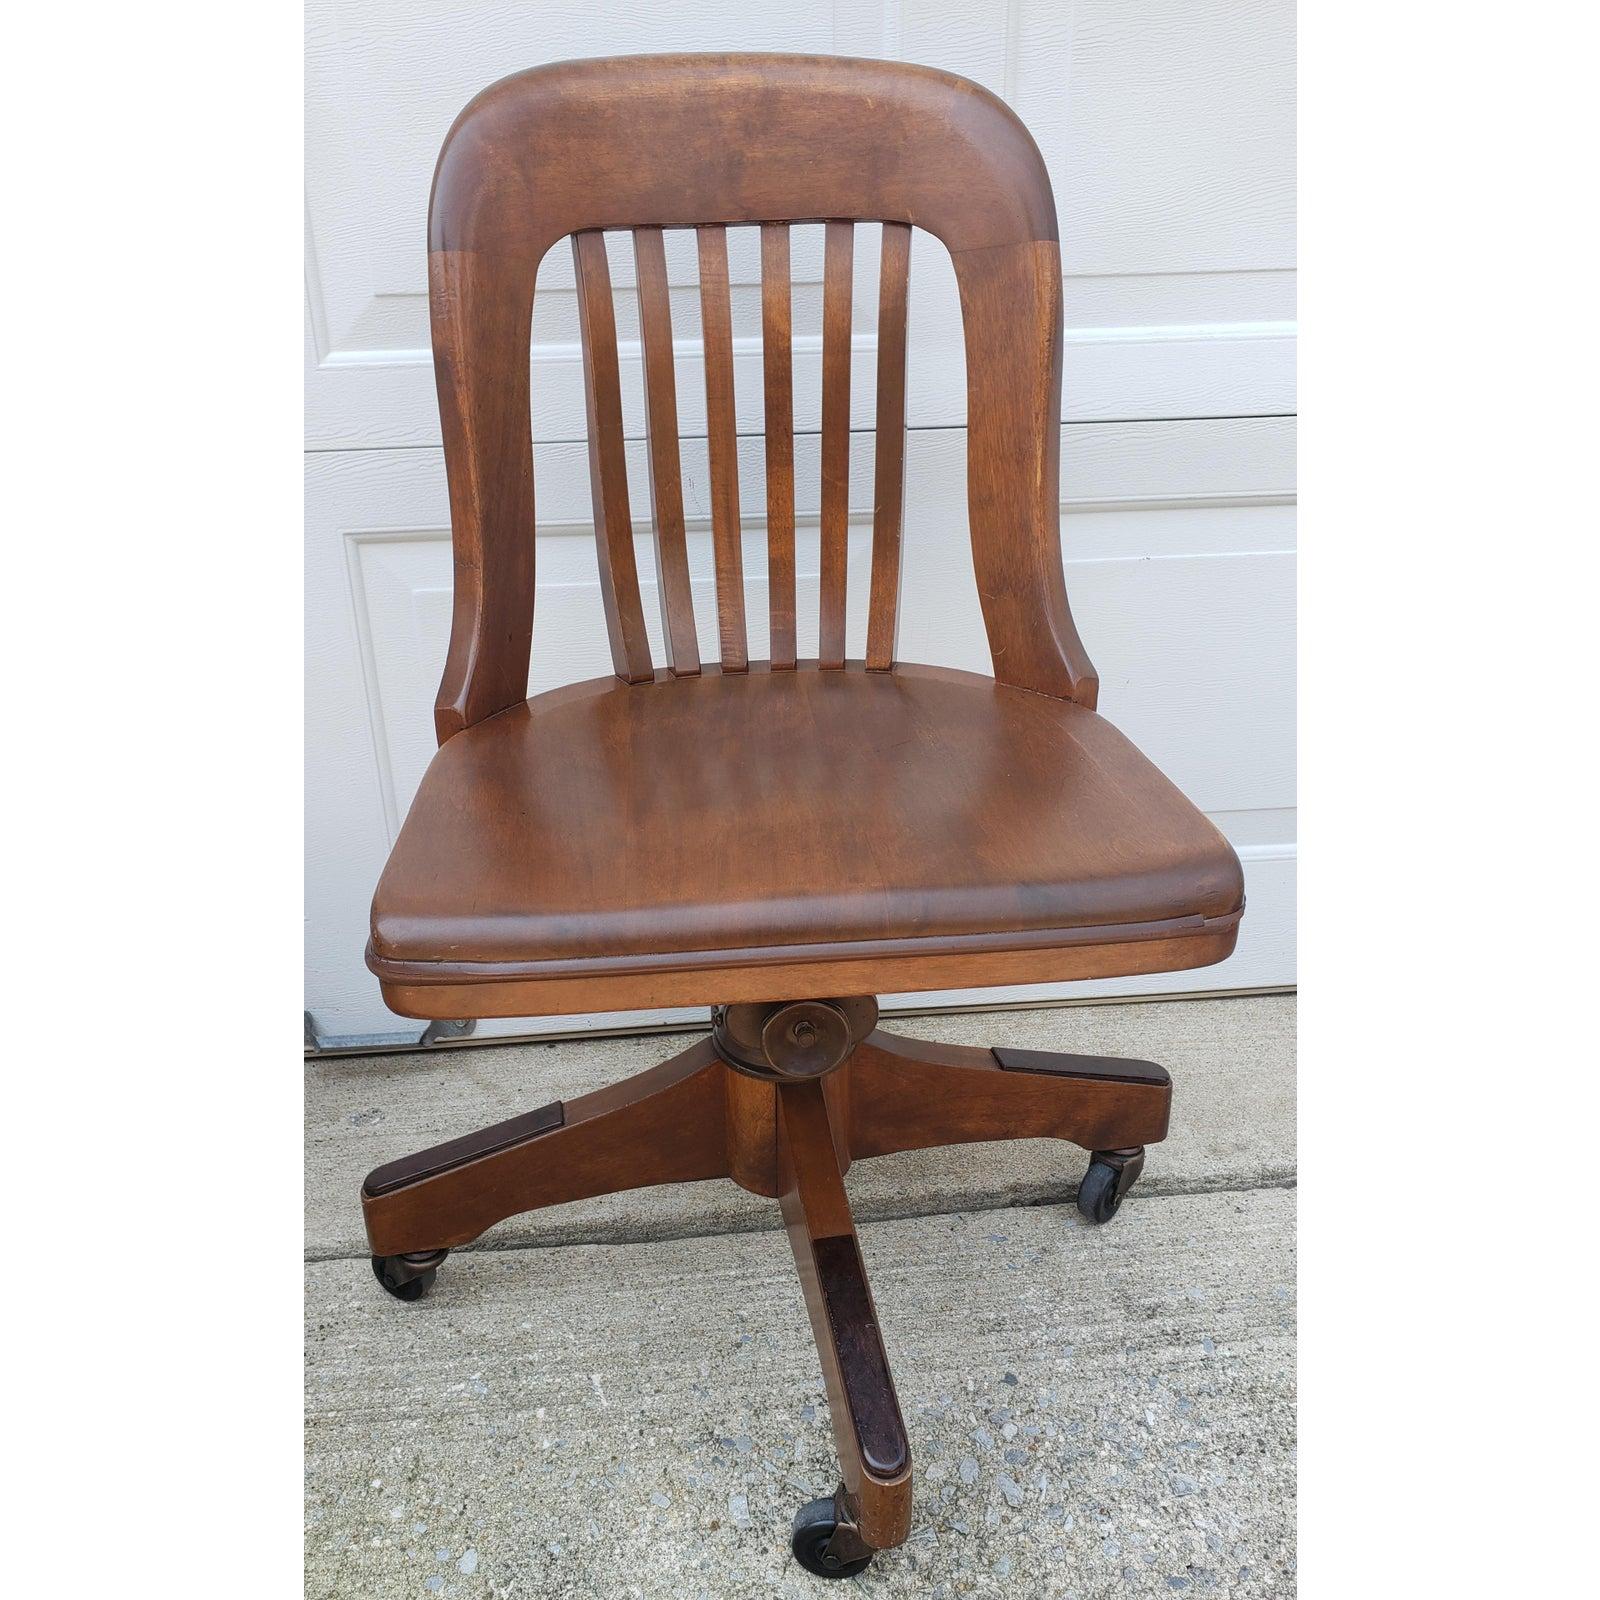 Late 1800s bankers swivel chair 
In amazing excelleny antique condition
~ The Taylor Chair Co. sticker is present, even though torn.
~ Wood is Oak I believe
~ This chair has wonderful lines
~ Metal under carriage in excellent condition.
~